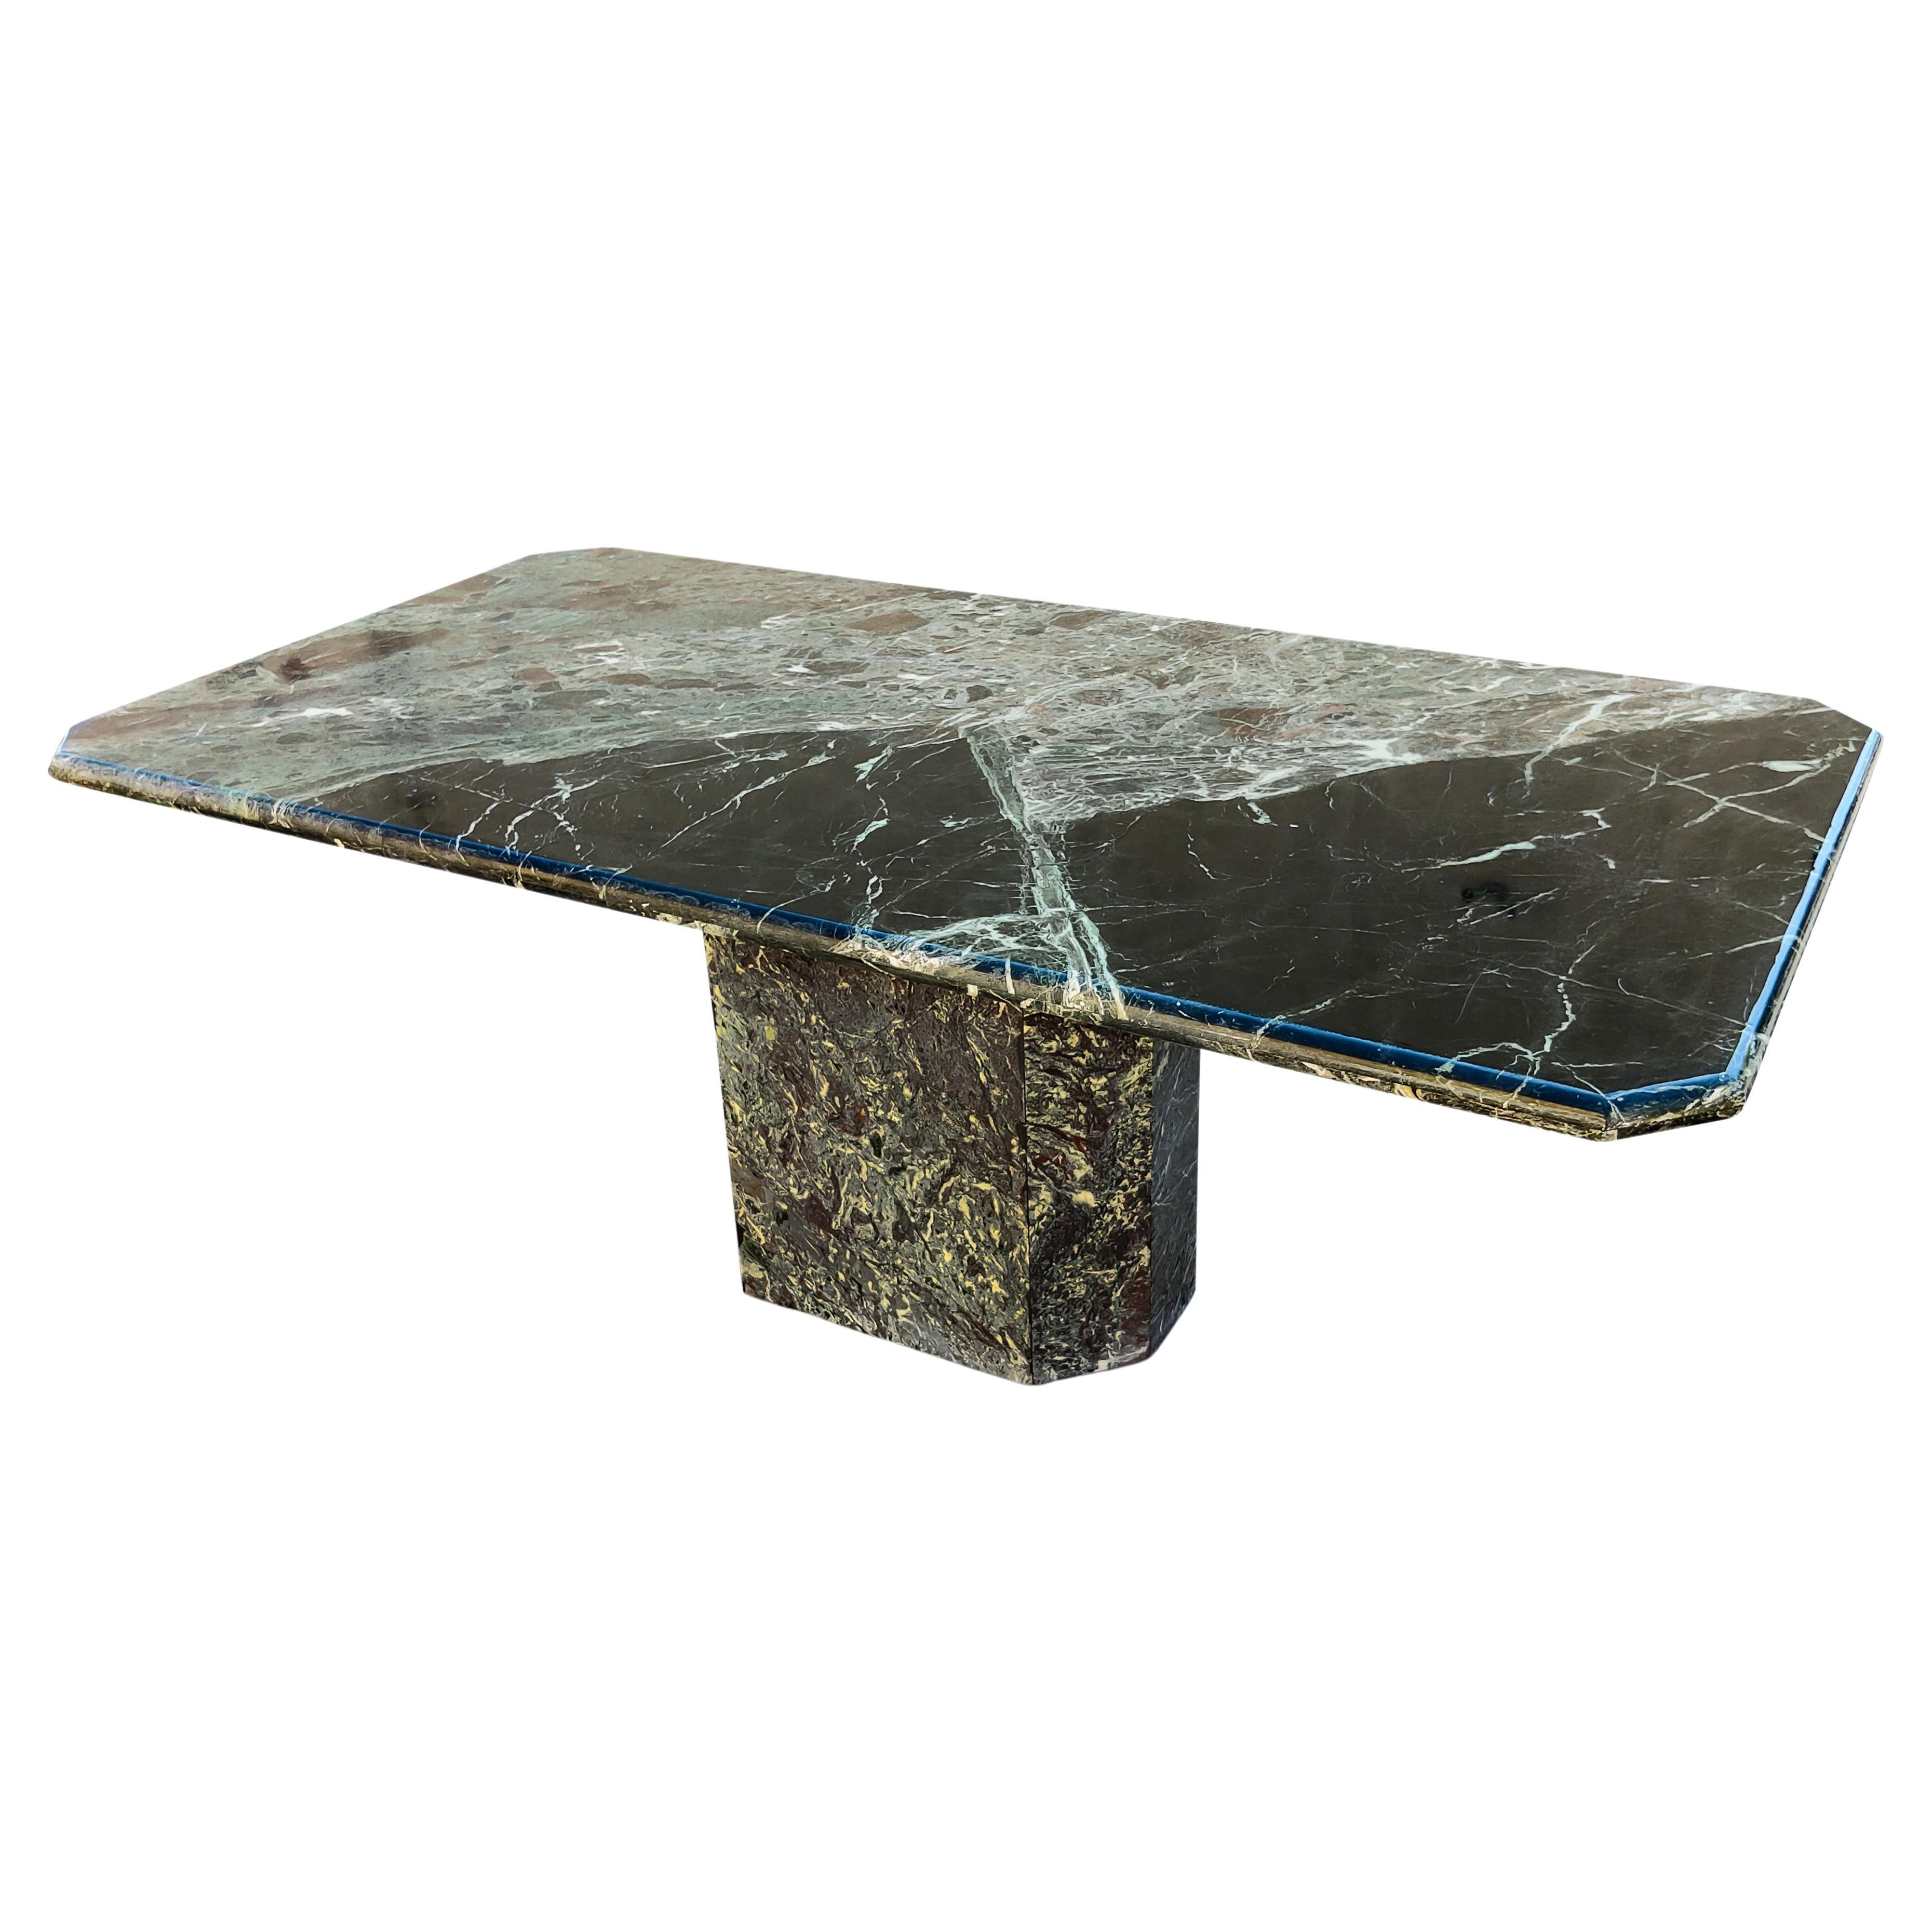 Large Rectangular Rosso Levanto Marble Dining Table Black Green Red